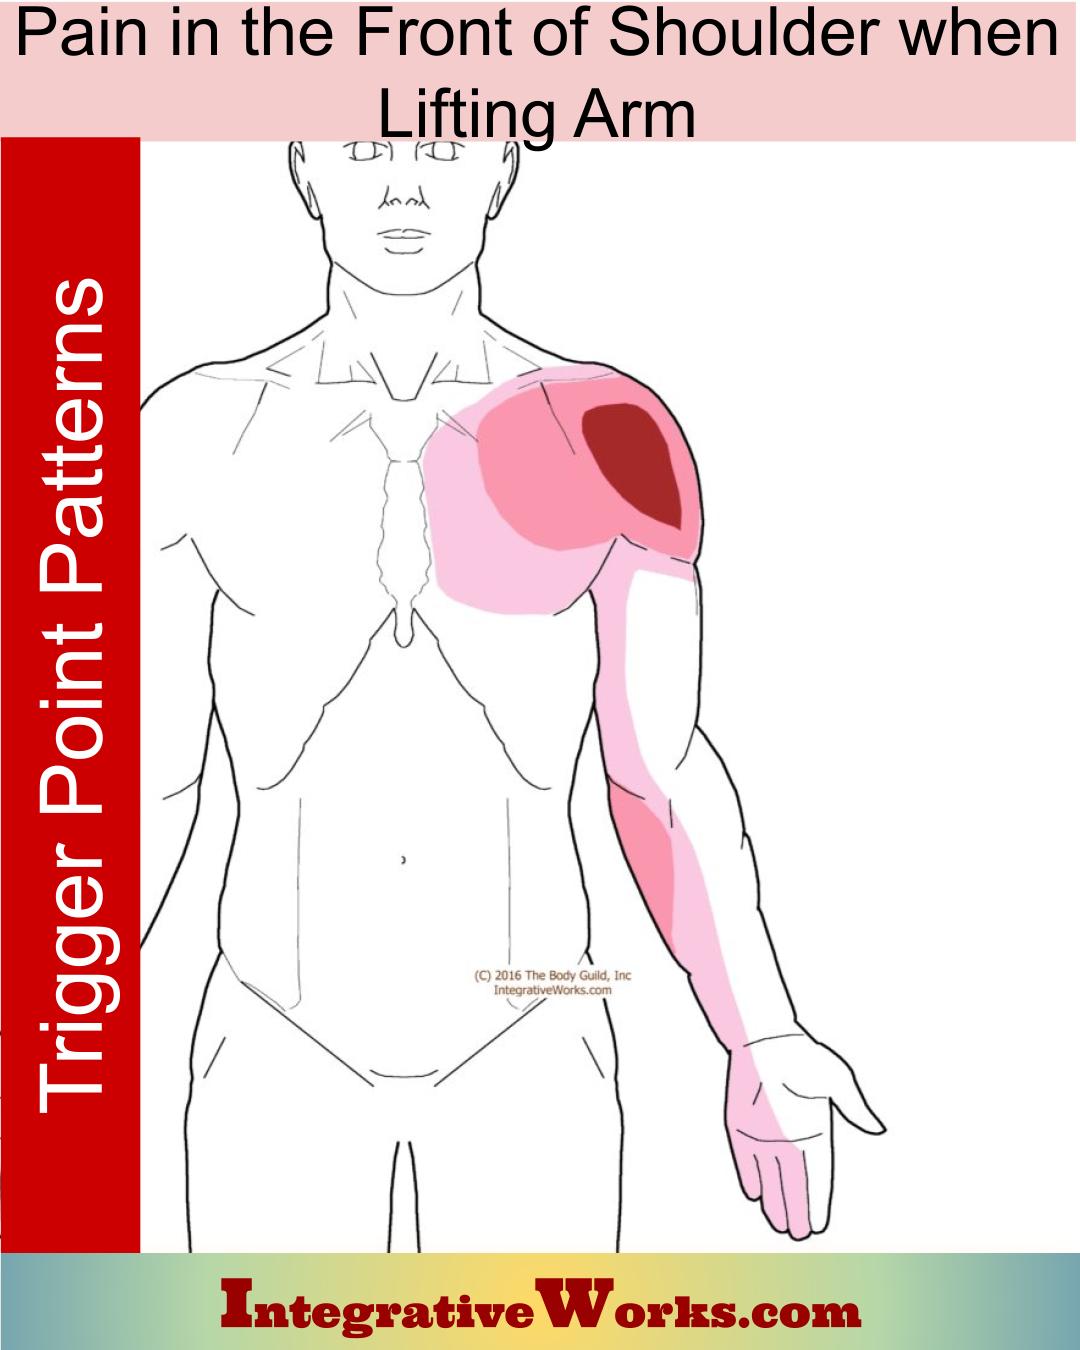 Pain in the Front of Shoulder When Lifting Arm